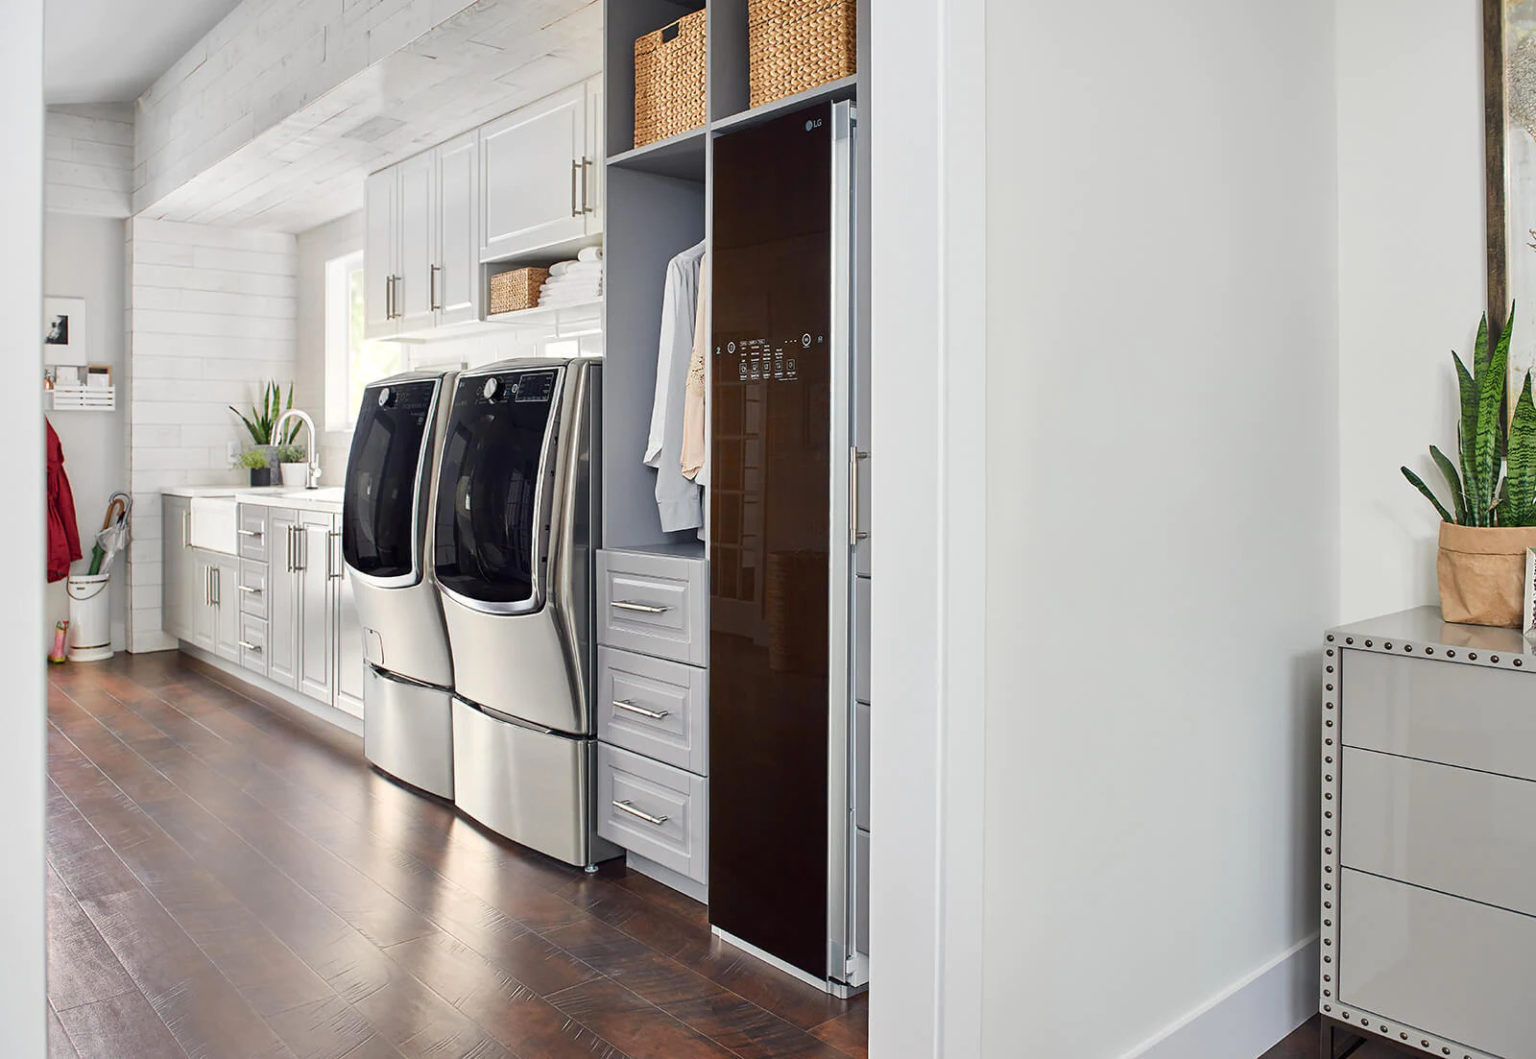 An LG washer and dryer together in a laundry room